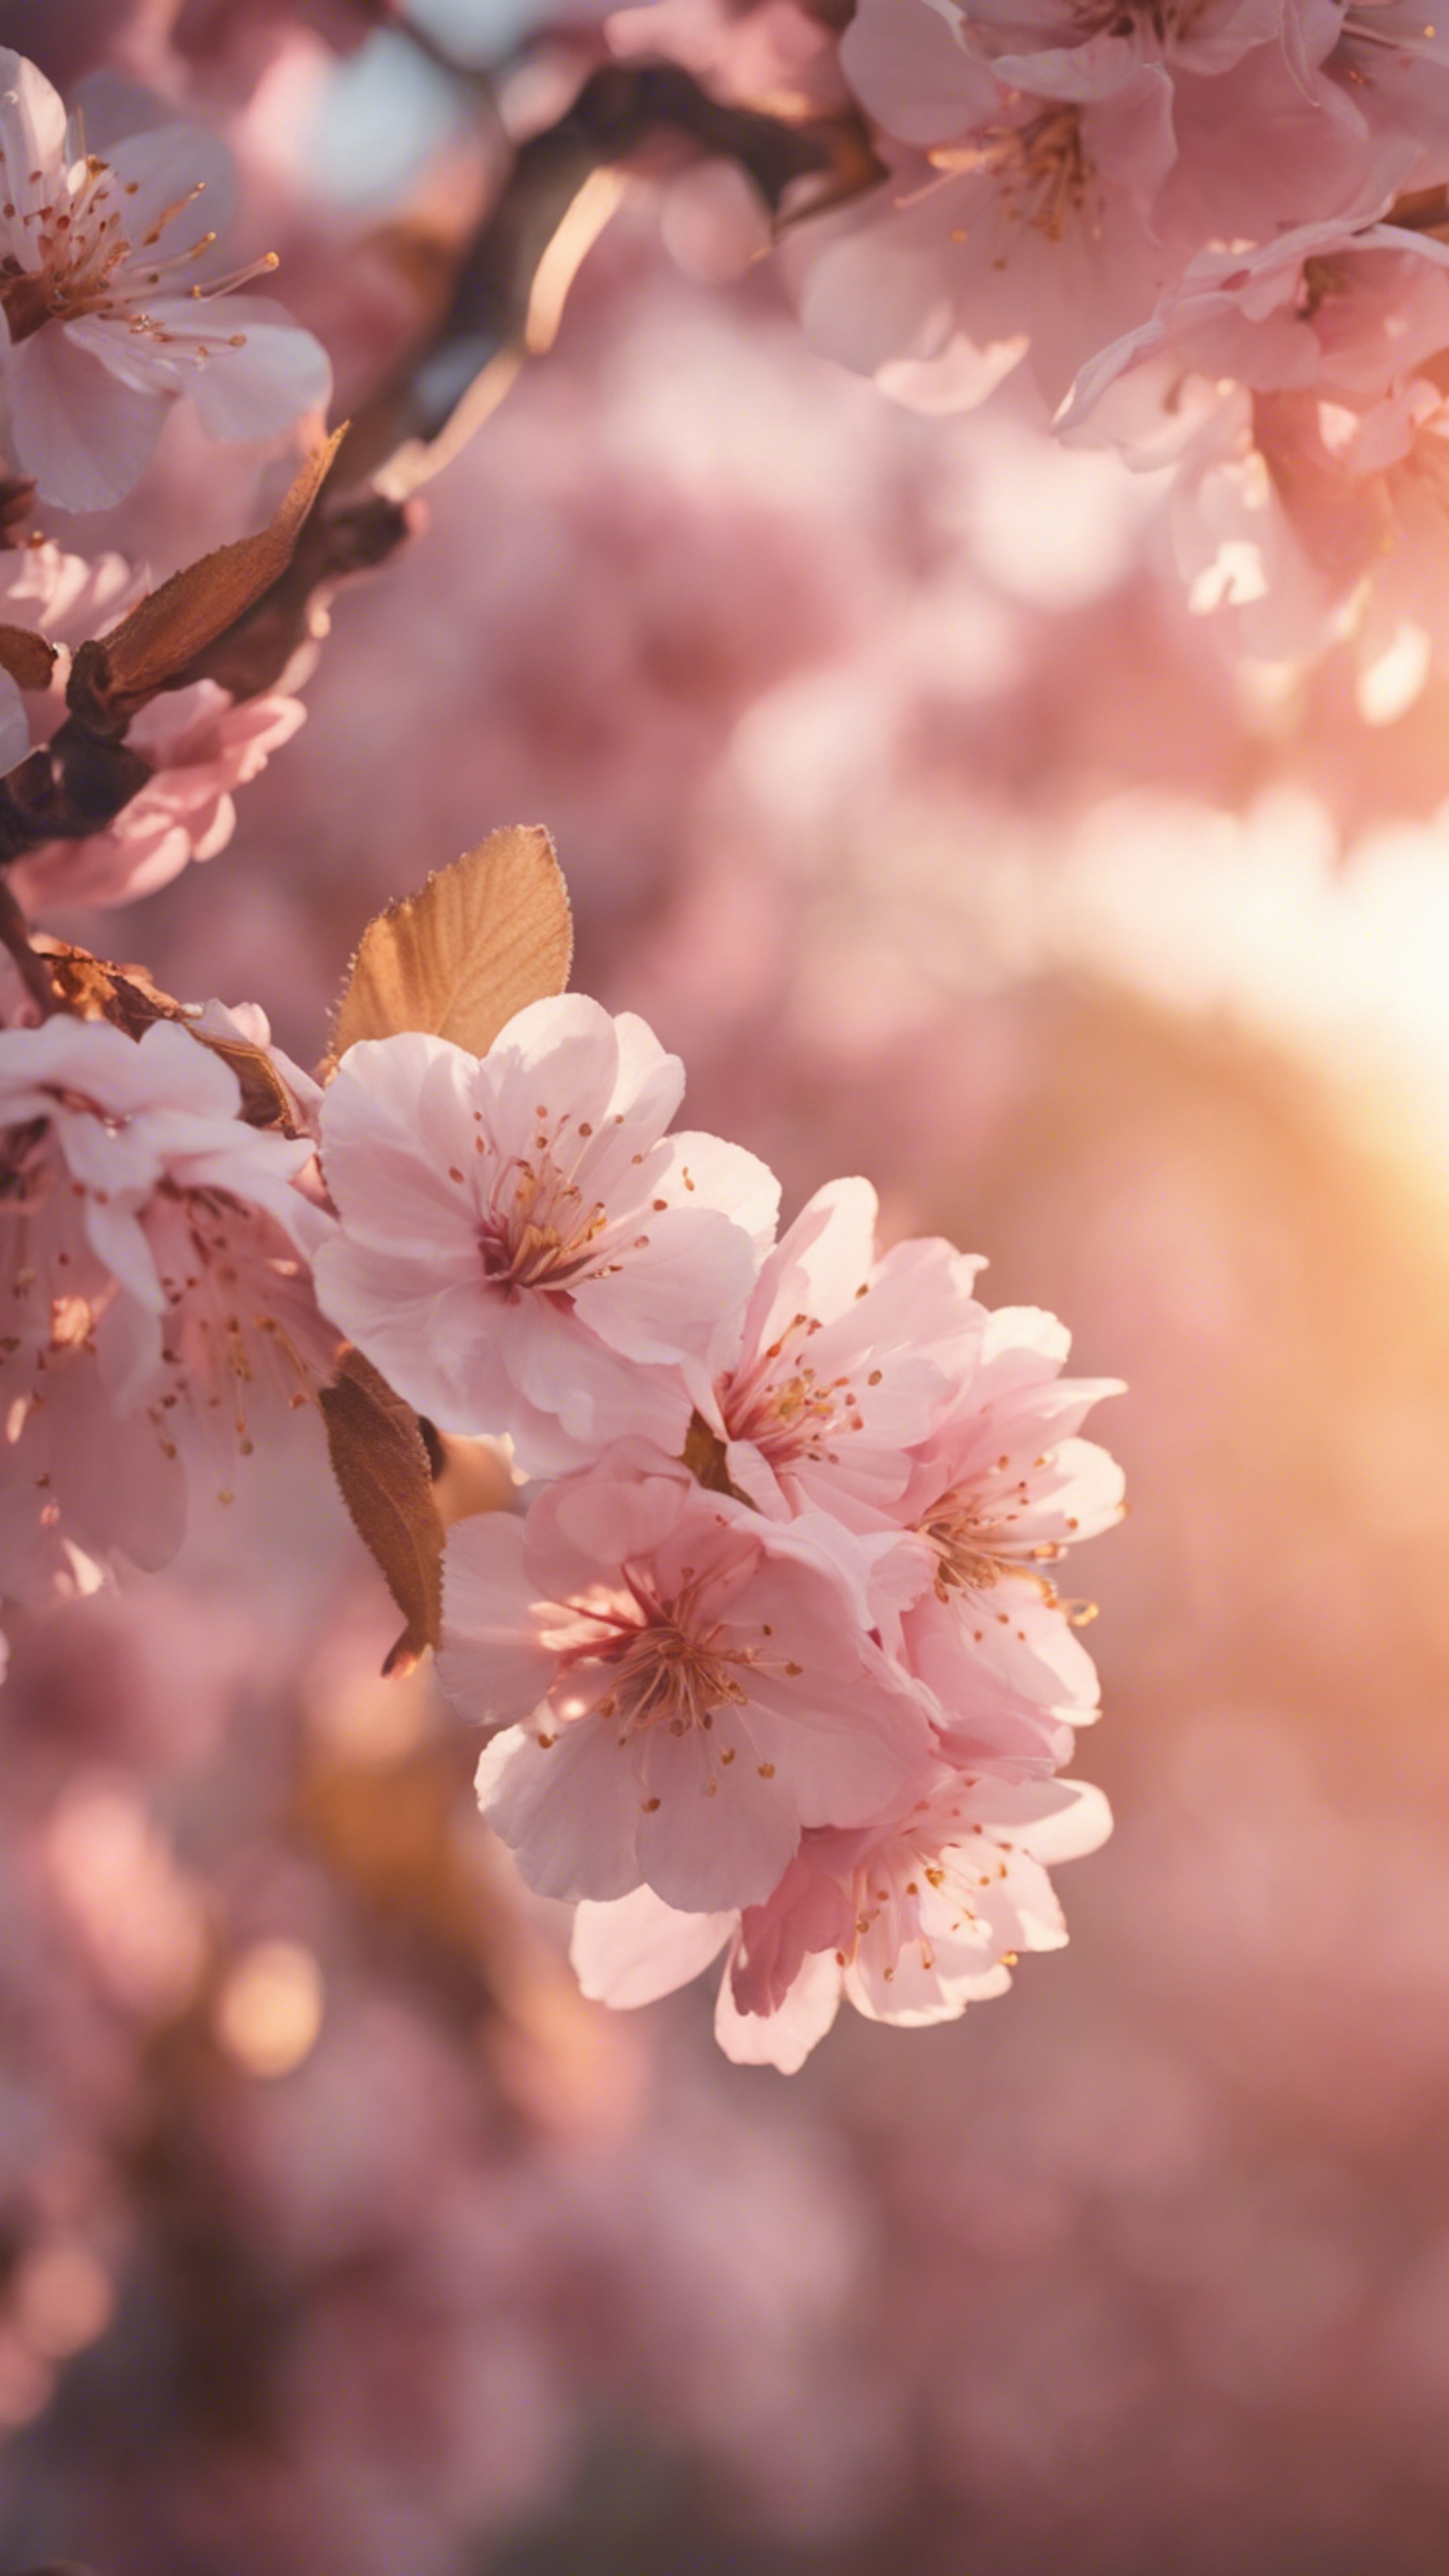 A delicate pink cherry blossom tree with gold leaves against a soft sunset. Kertas dinding[63878b5c392143fbba4e]